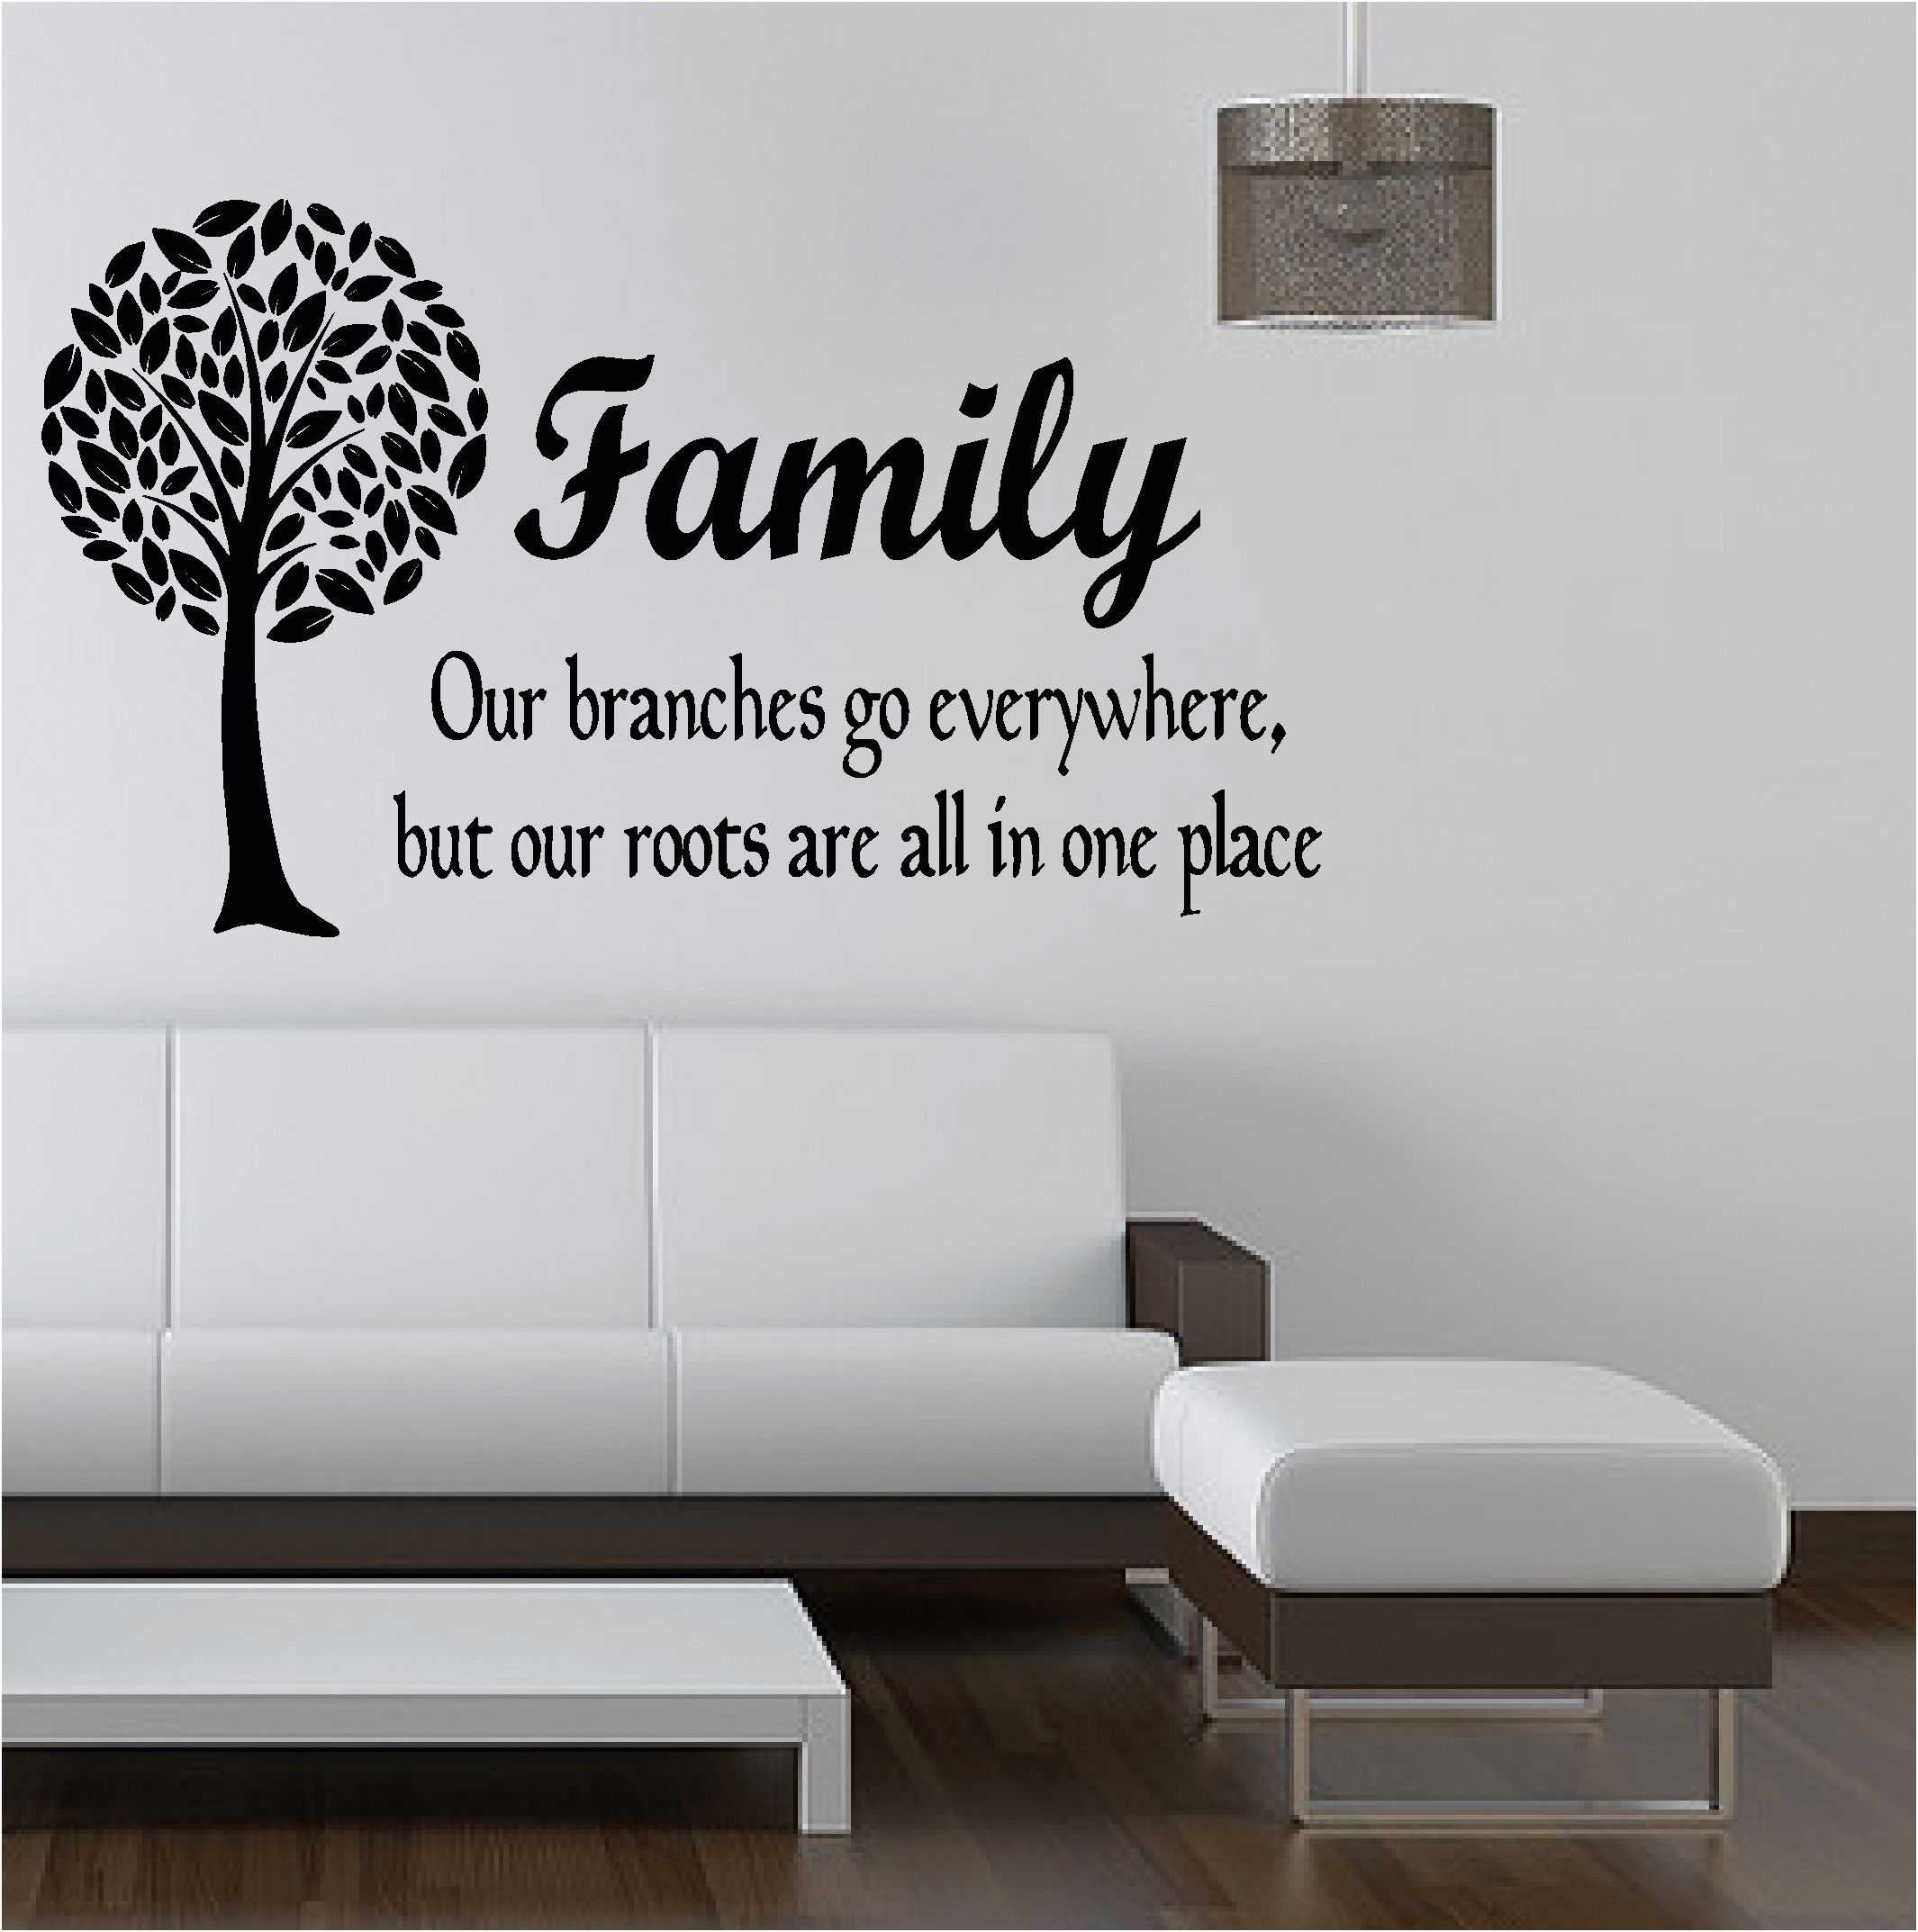 Family Tree Like Branches Vinyl Art Sticker Bedroom Lounge | Ebay Within Most Recent Family Tree Wall Art (View 6 of 15)